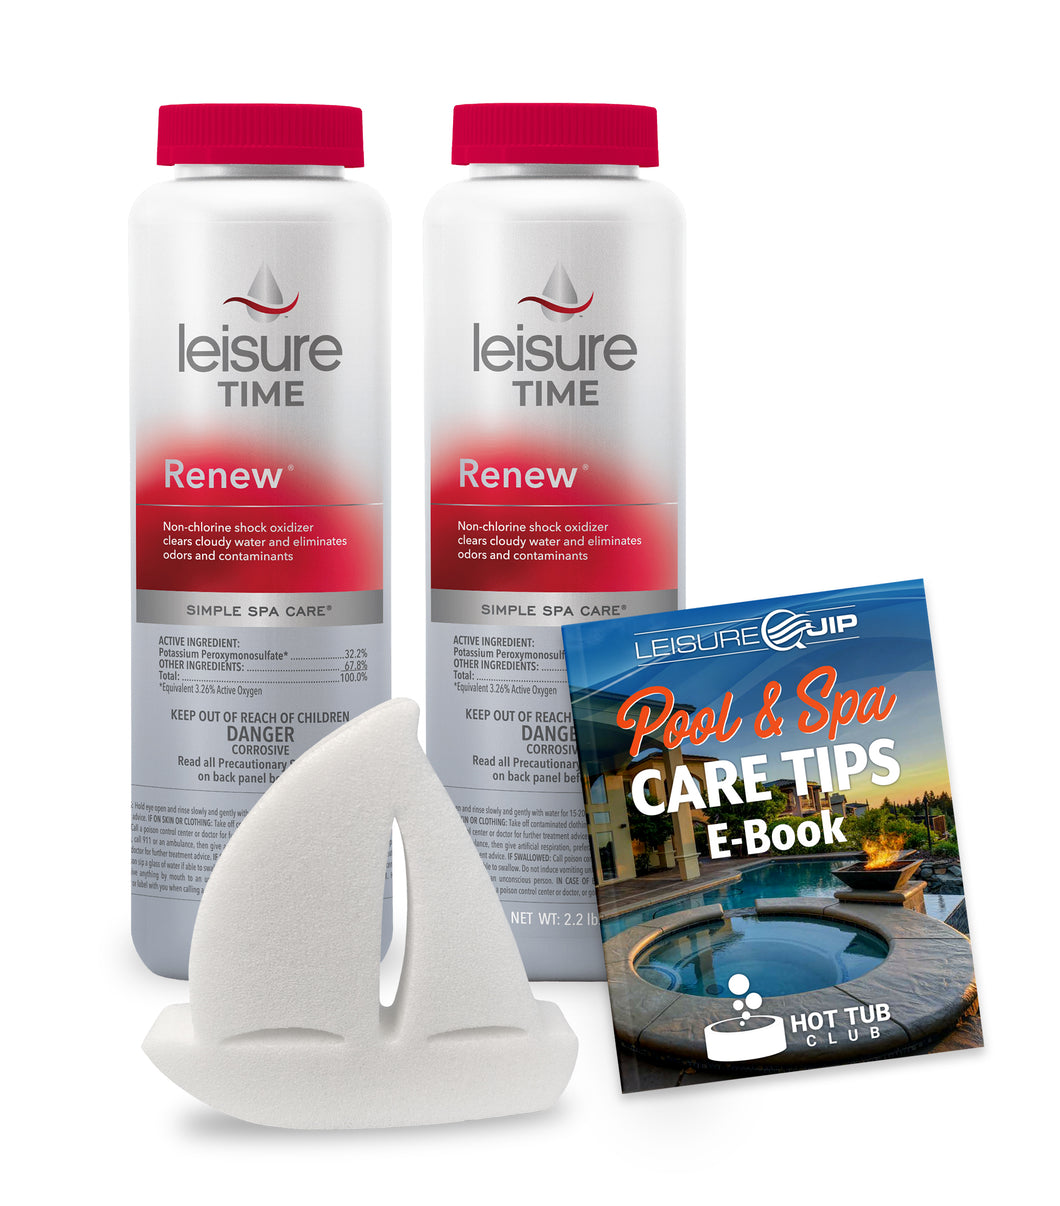 Leisure Time Renew Spa Shock-Oxidizer 2.2lb (2 Pack) with ScumBoat & Hot Tub Care E-Book